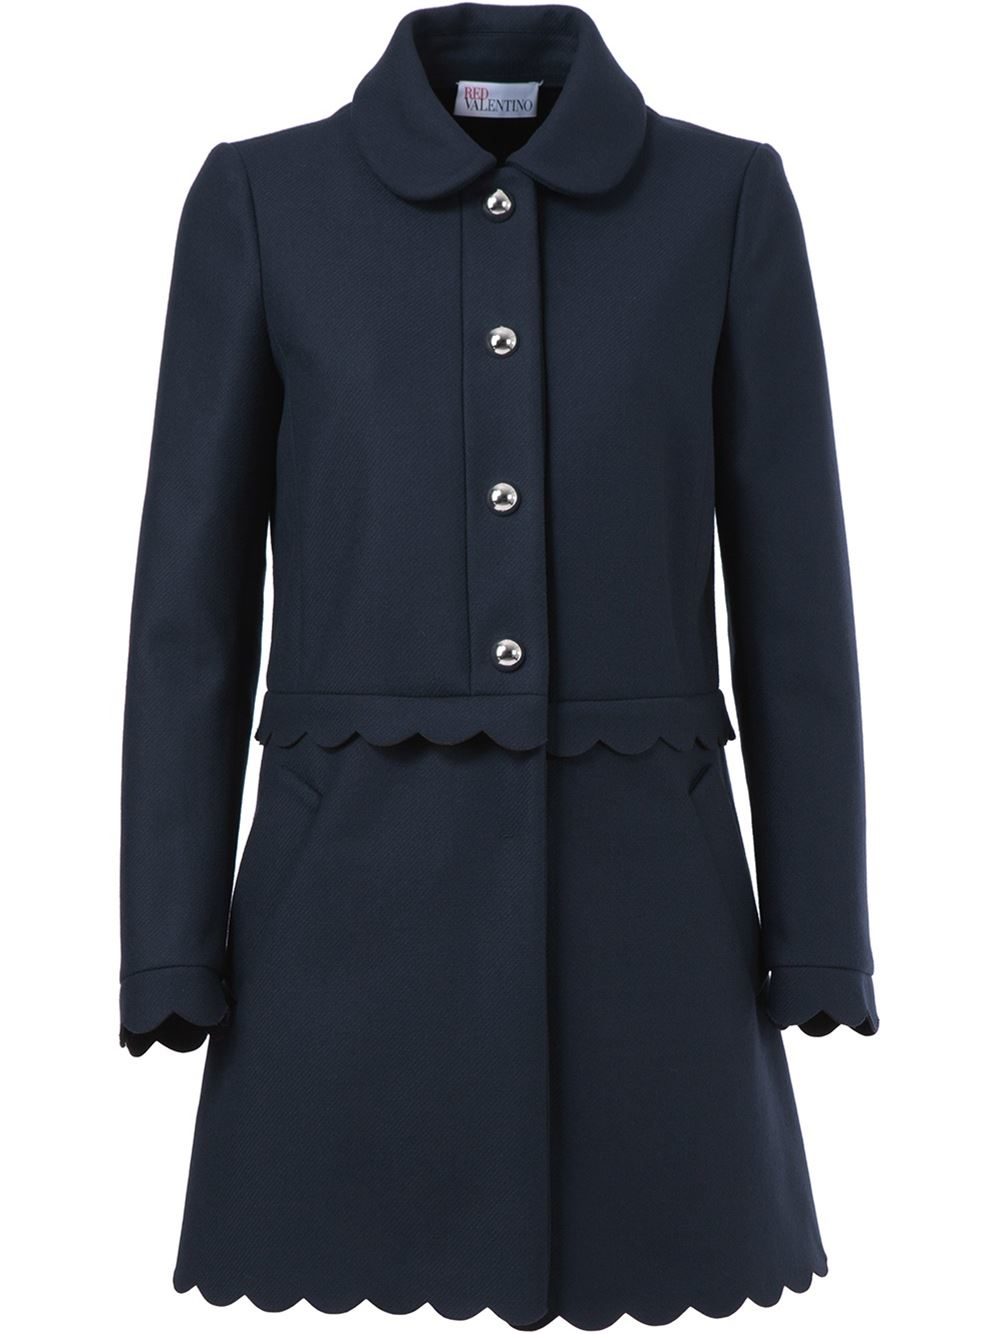 Red valentino Scalloped Trim Coat in Blue | Lyst